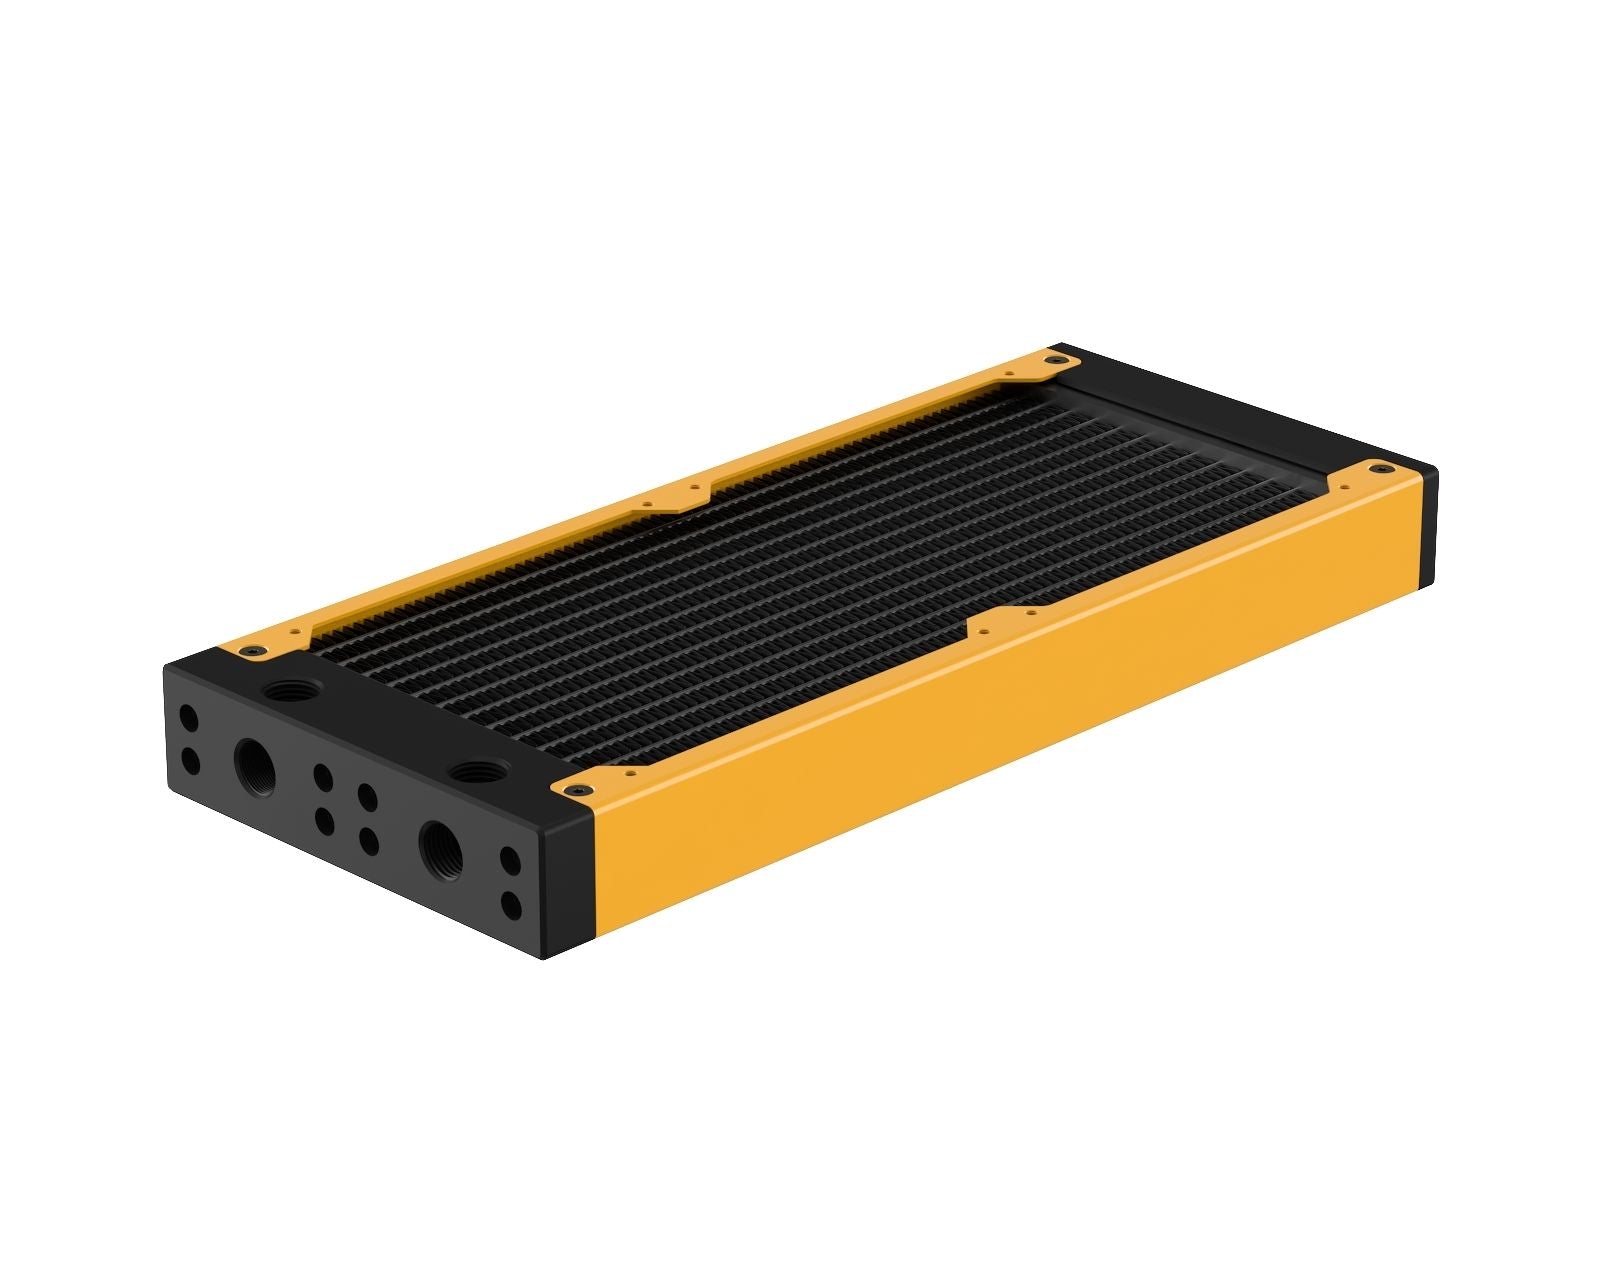 PrimoChill 240SL (30mm) EXIMO Modular Radiator, Black POM, 2x120mm, Dual Fan (R-SL-BK24) Available in 20+ Colors, Assembled in USA and Custom Watercooling Loop Ready - Yellow